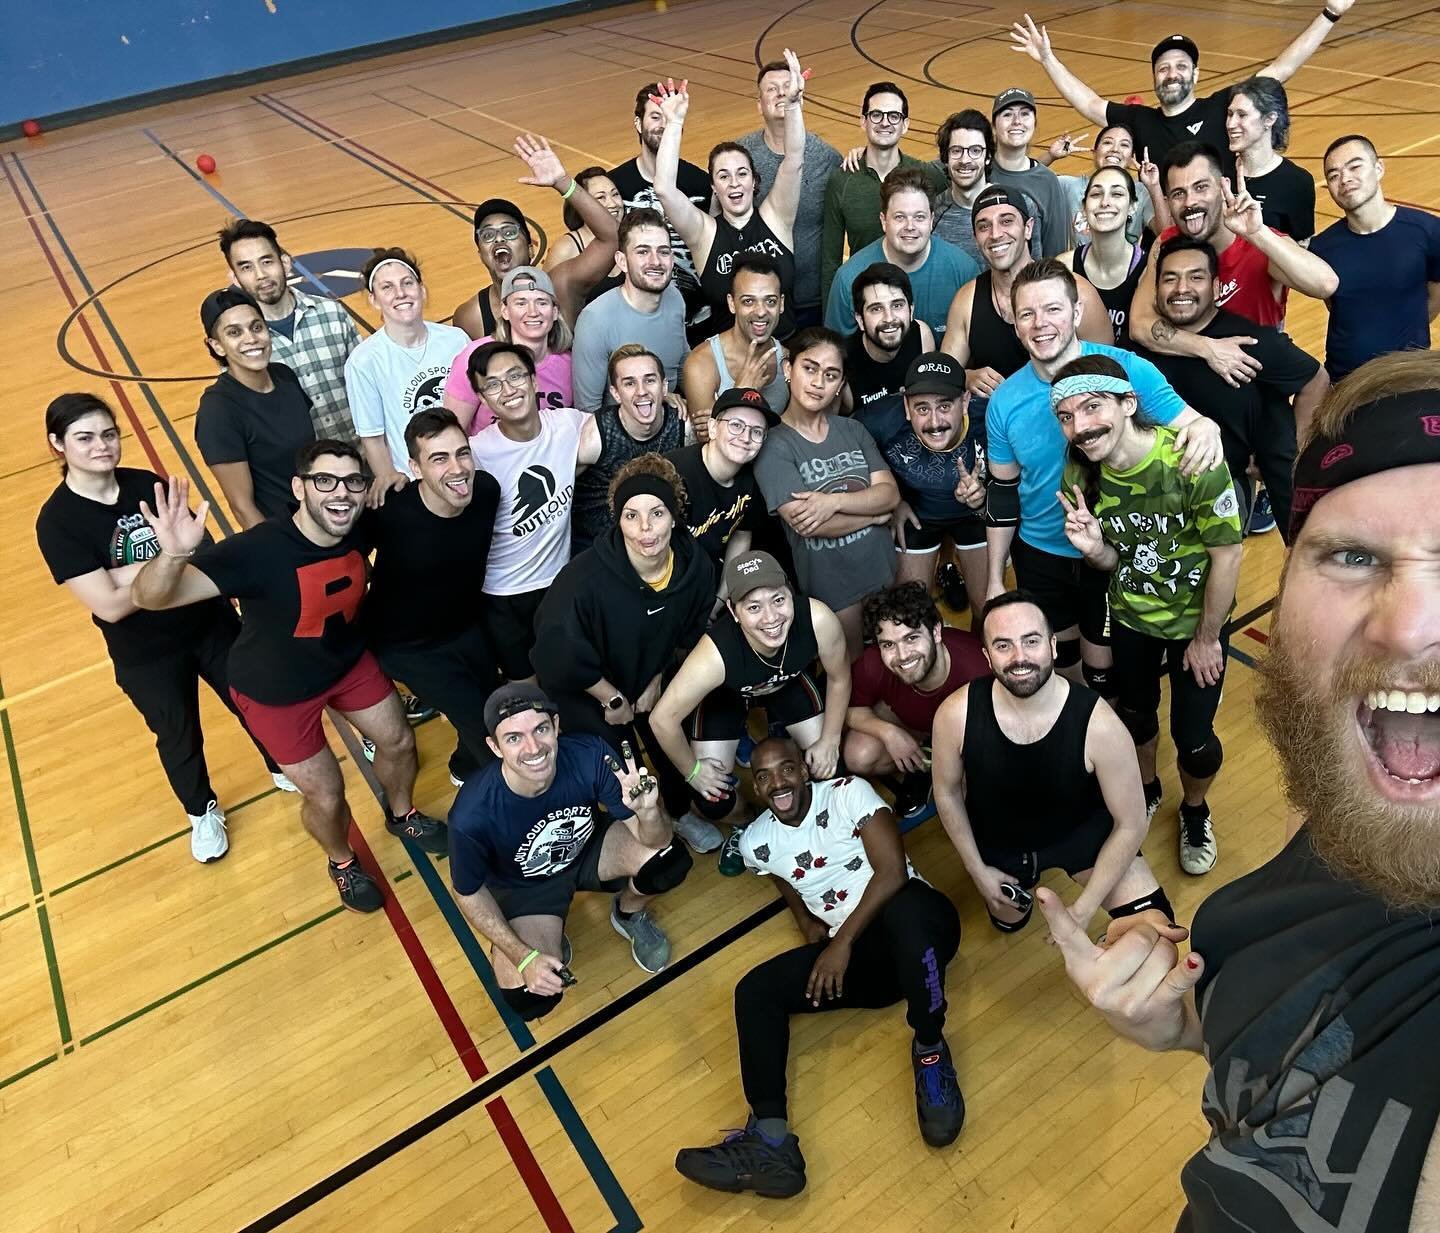 No better way to start a Sunday! Thanks all for coming out!  #dodgeball #sf #queersports #sundayfunday